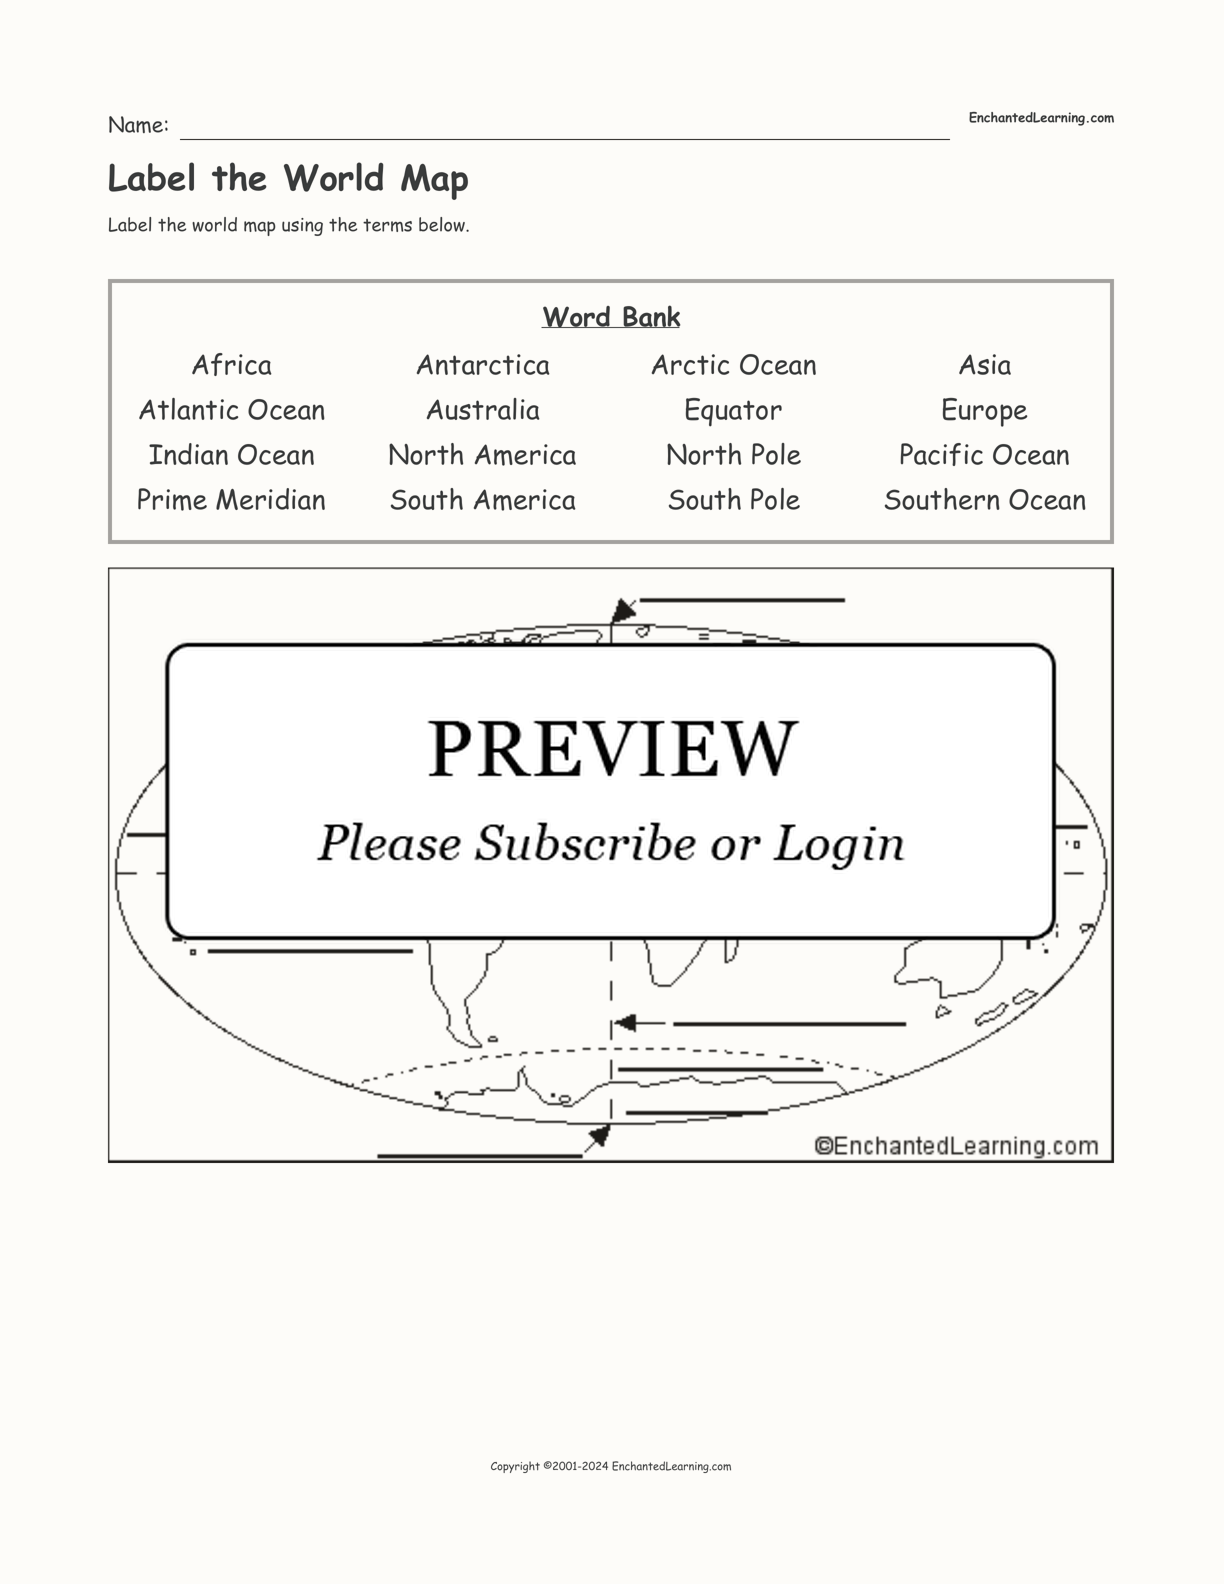 Label the World Map - Enchanted Learning Pertaining To Parts Of A Map Worksheet